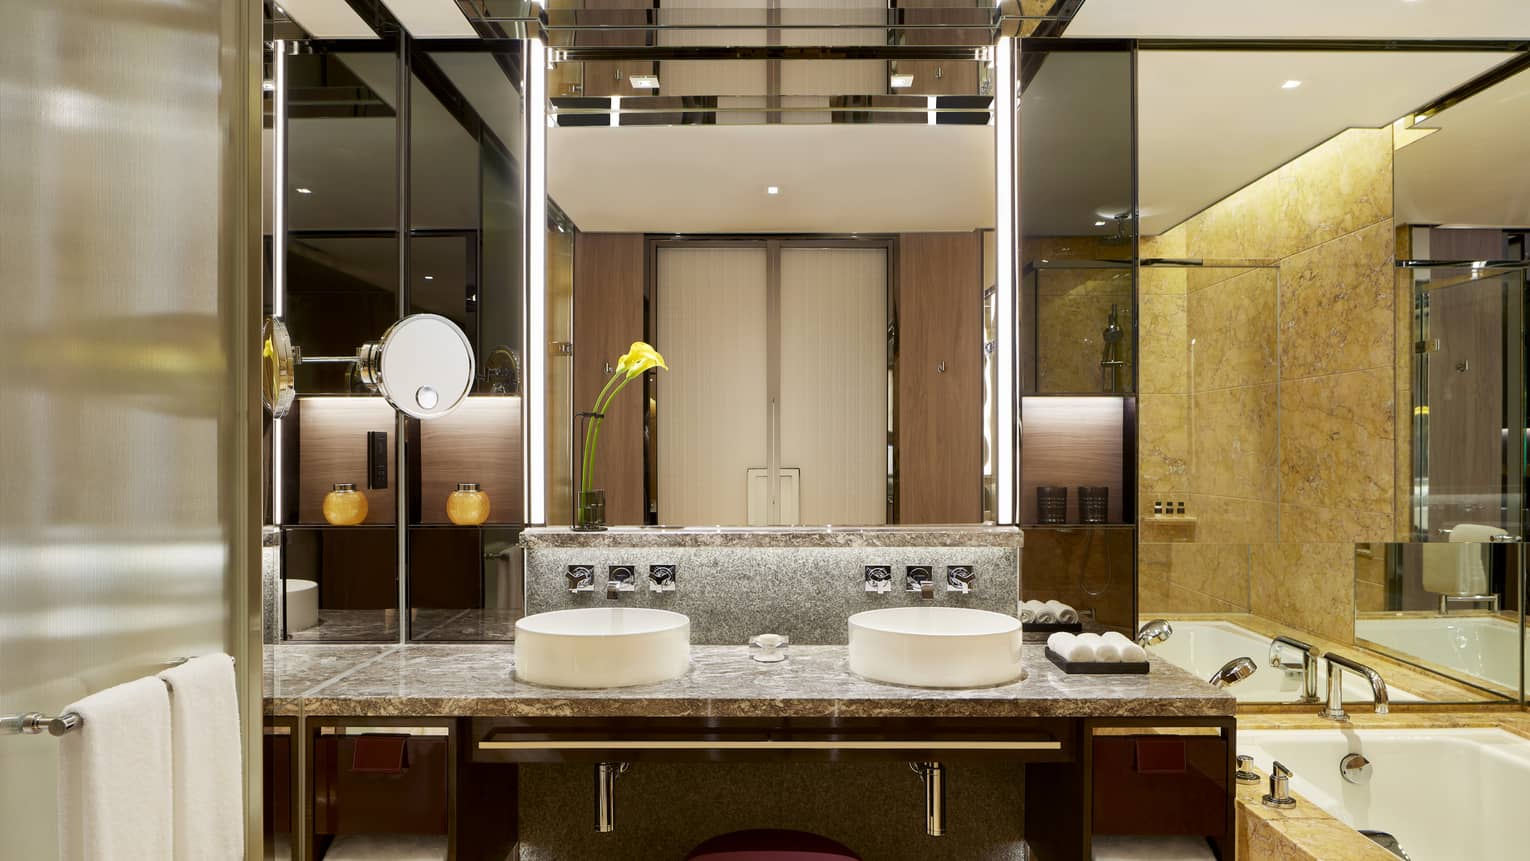 Bathroom with double vanity, tub, wall of mirrors